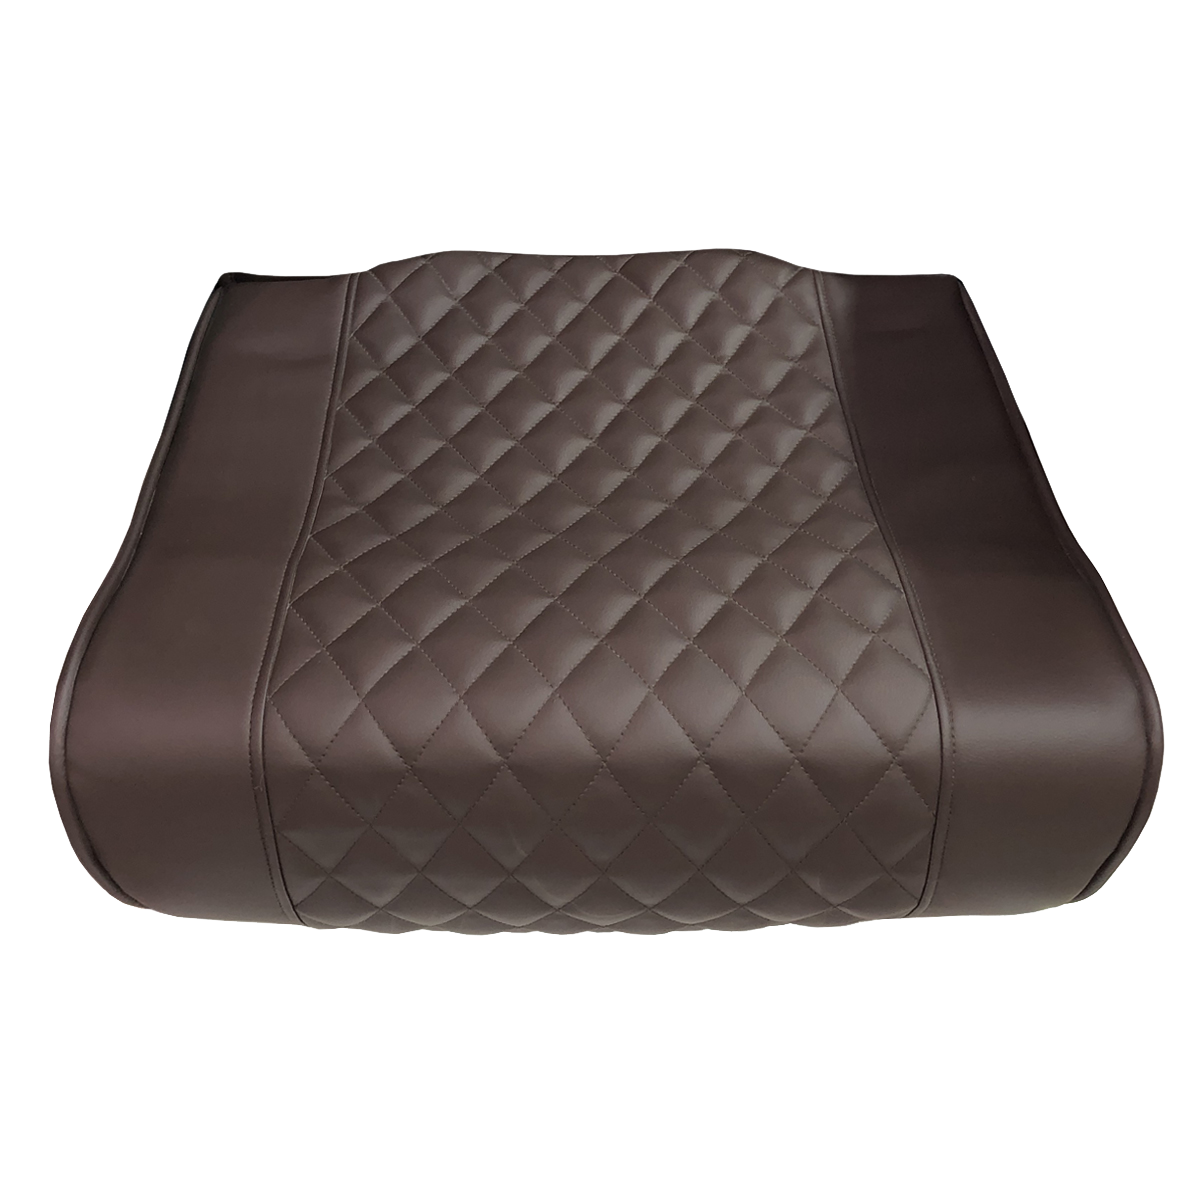 Whale Spa Chocolate Diamond PU Leather Seat | Replacement Pedicure Chair Parts